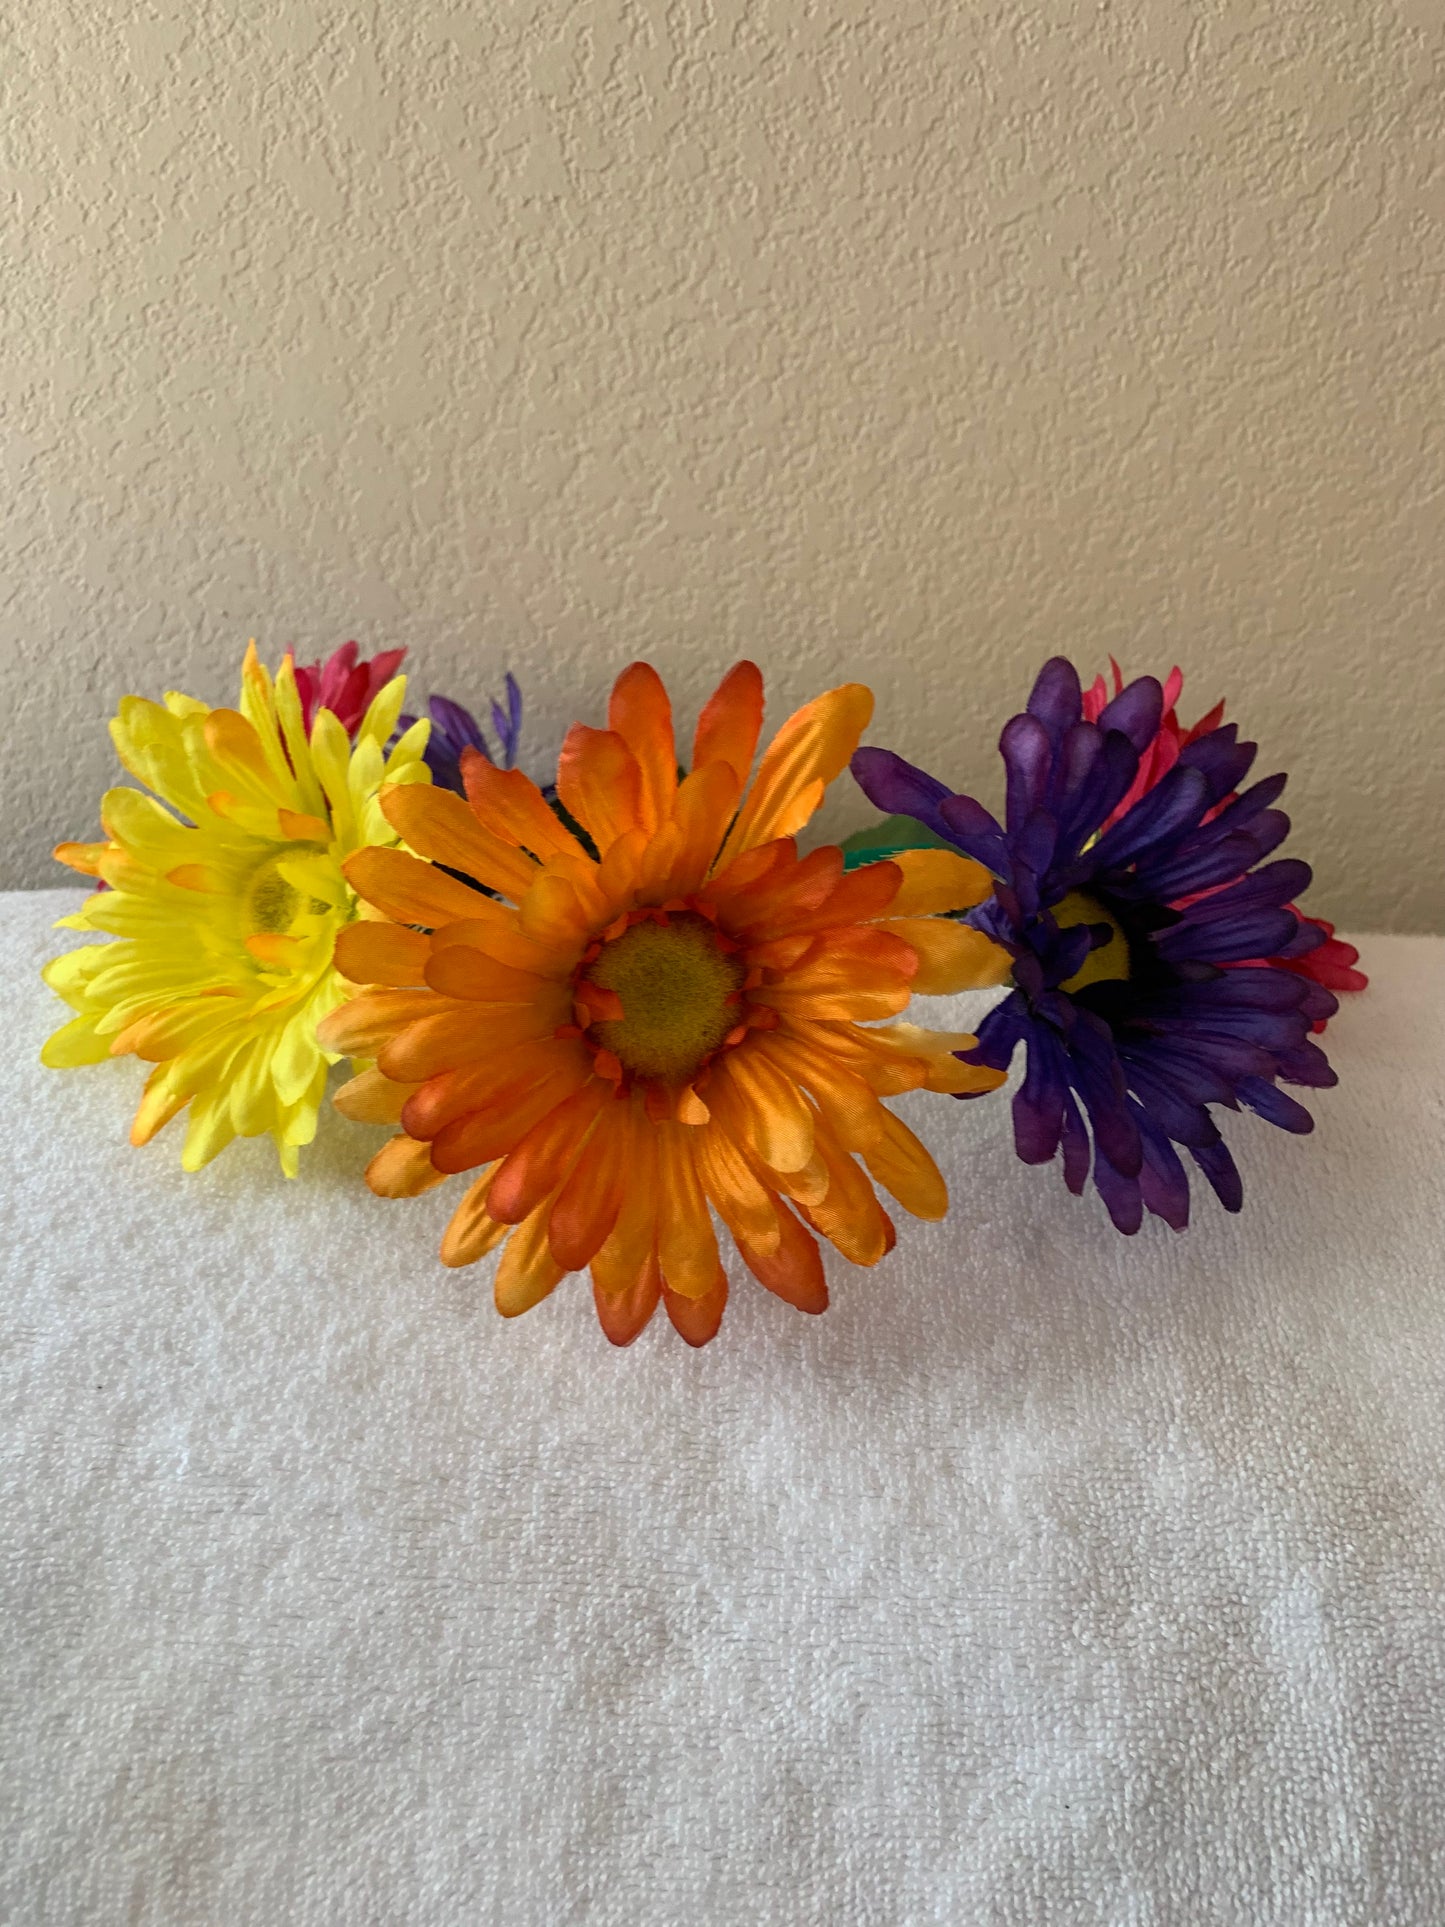 Large Wreath Lighted - Pink, Purple, Yellow, and Orange Daisies